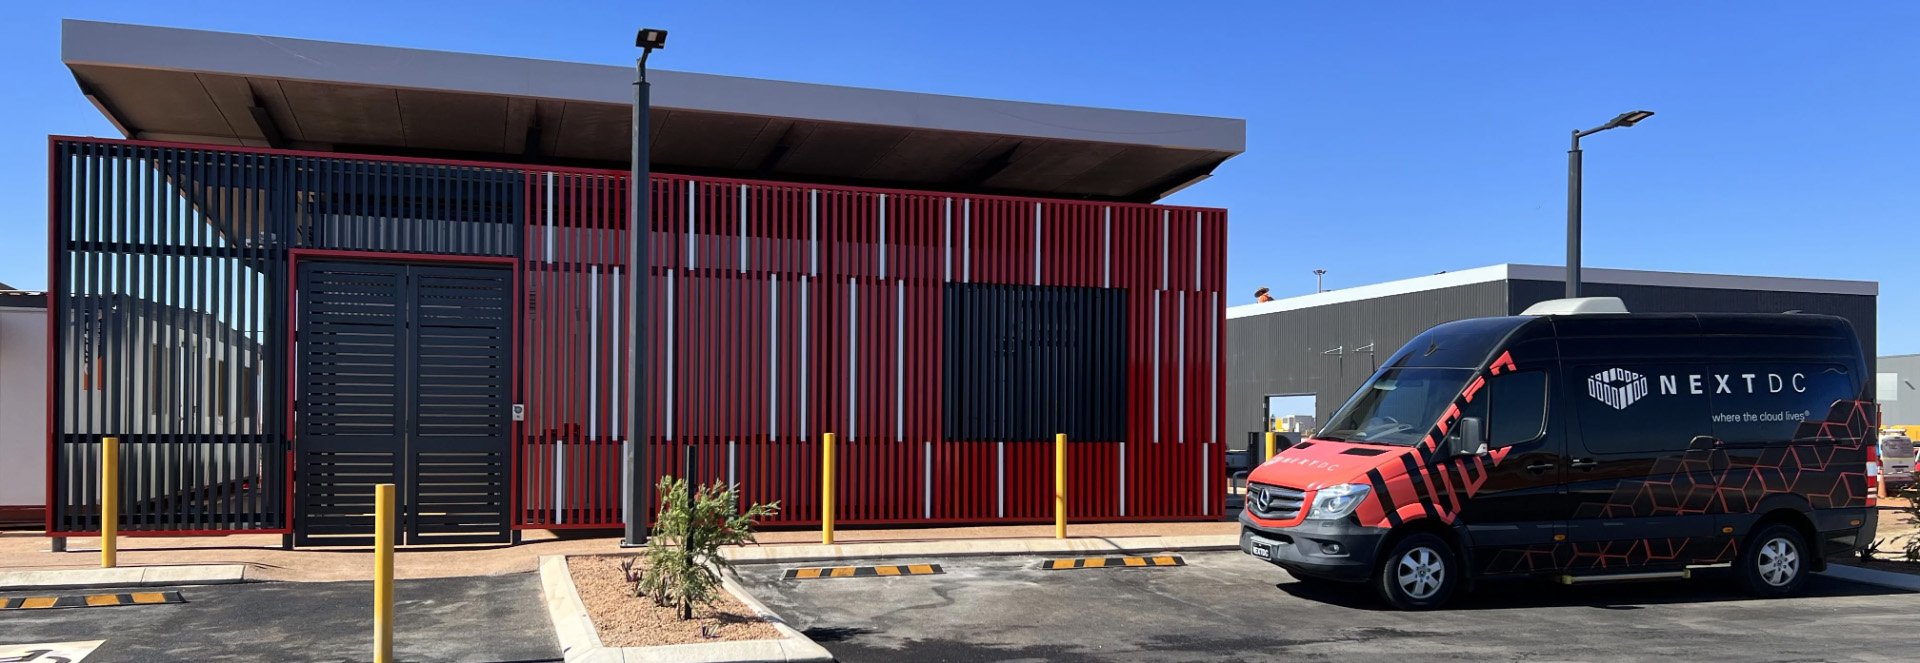 NEXTDC to partner with BHP, Vocus and Microsoft with launch of First Pilbara Data Centre